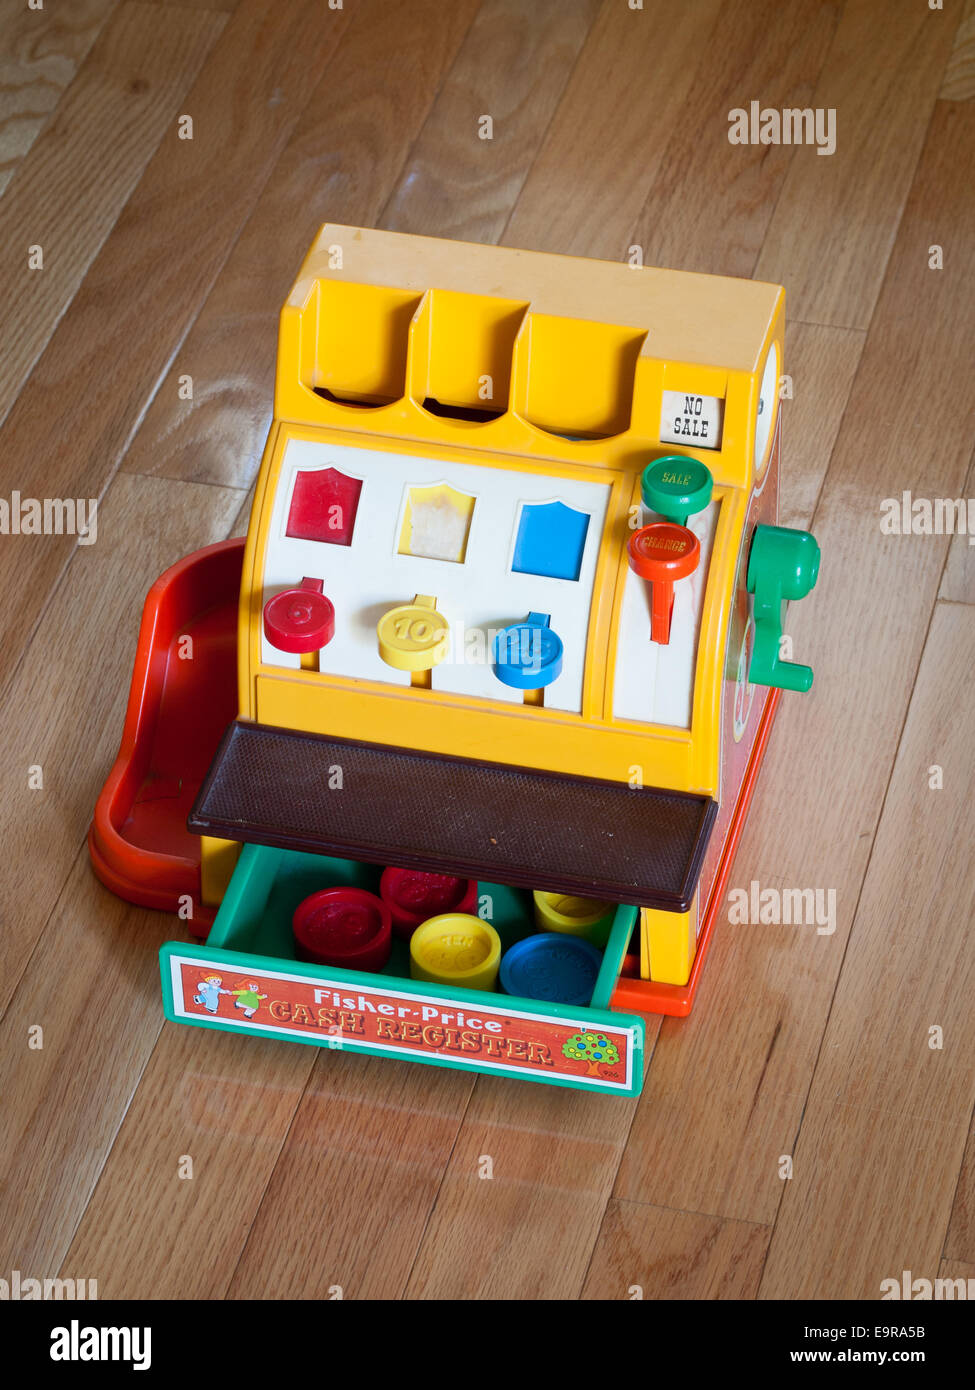 A vintage (circa 1980s) toy Fisher-Price cash register Stock Photo - Alamy